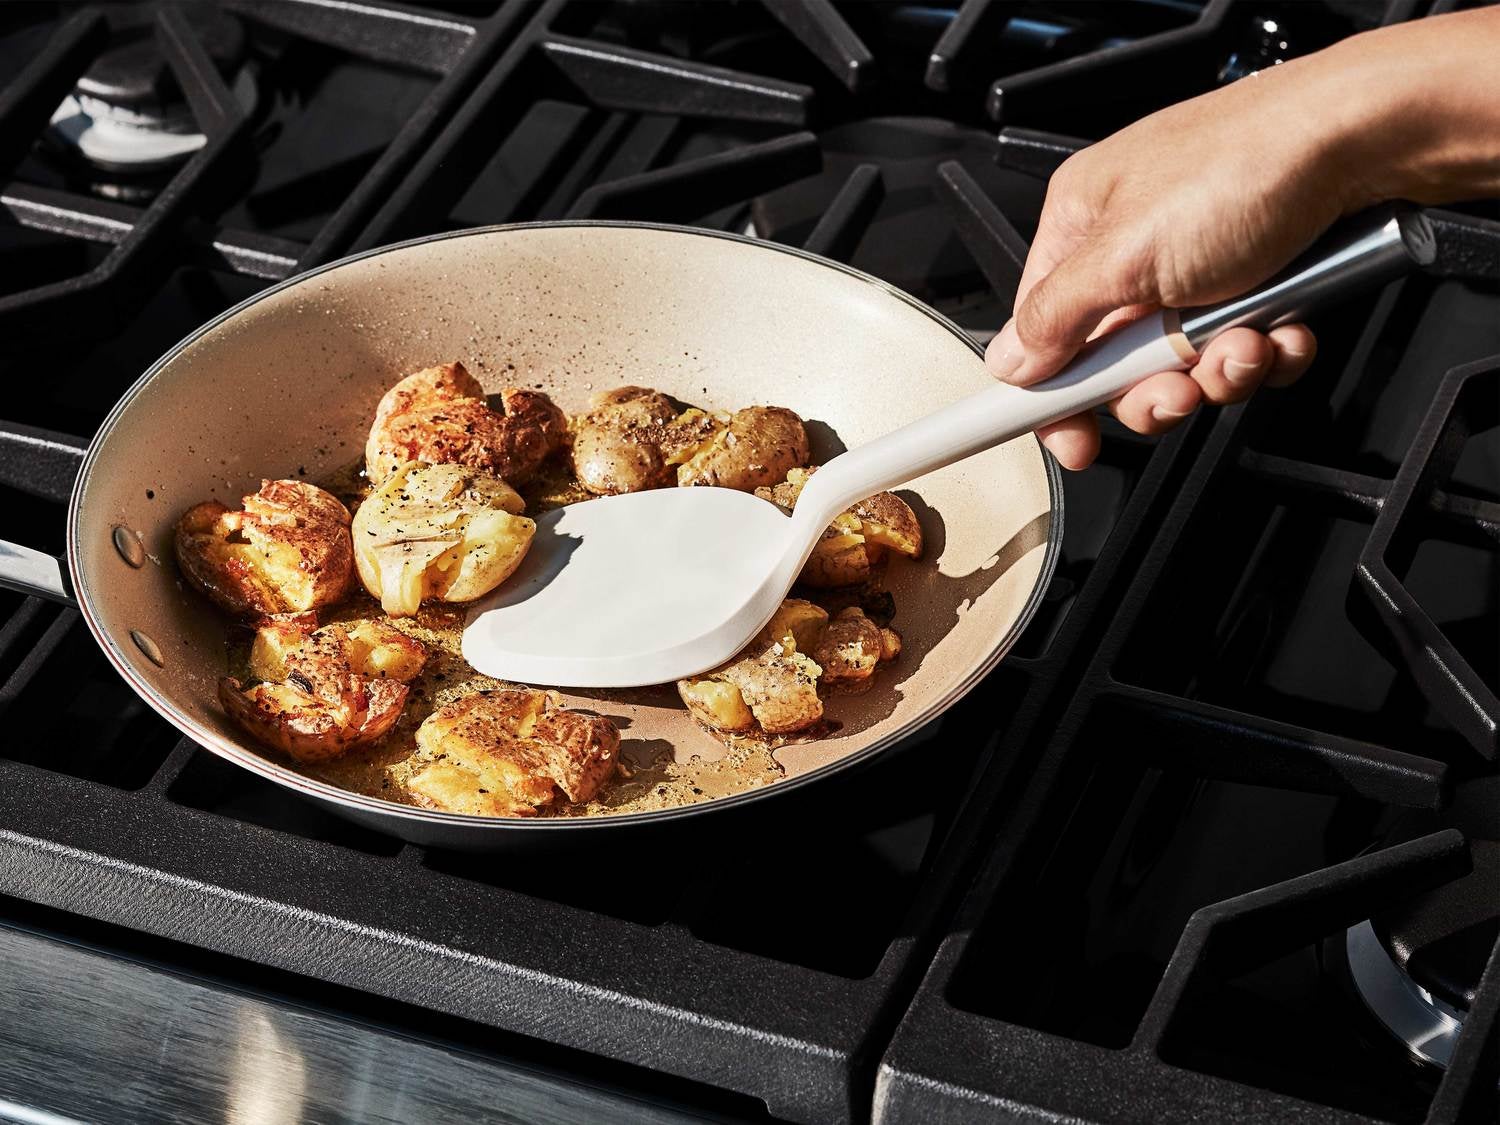 the spatula being used in pan on stove